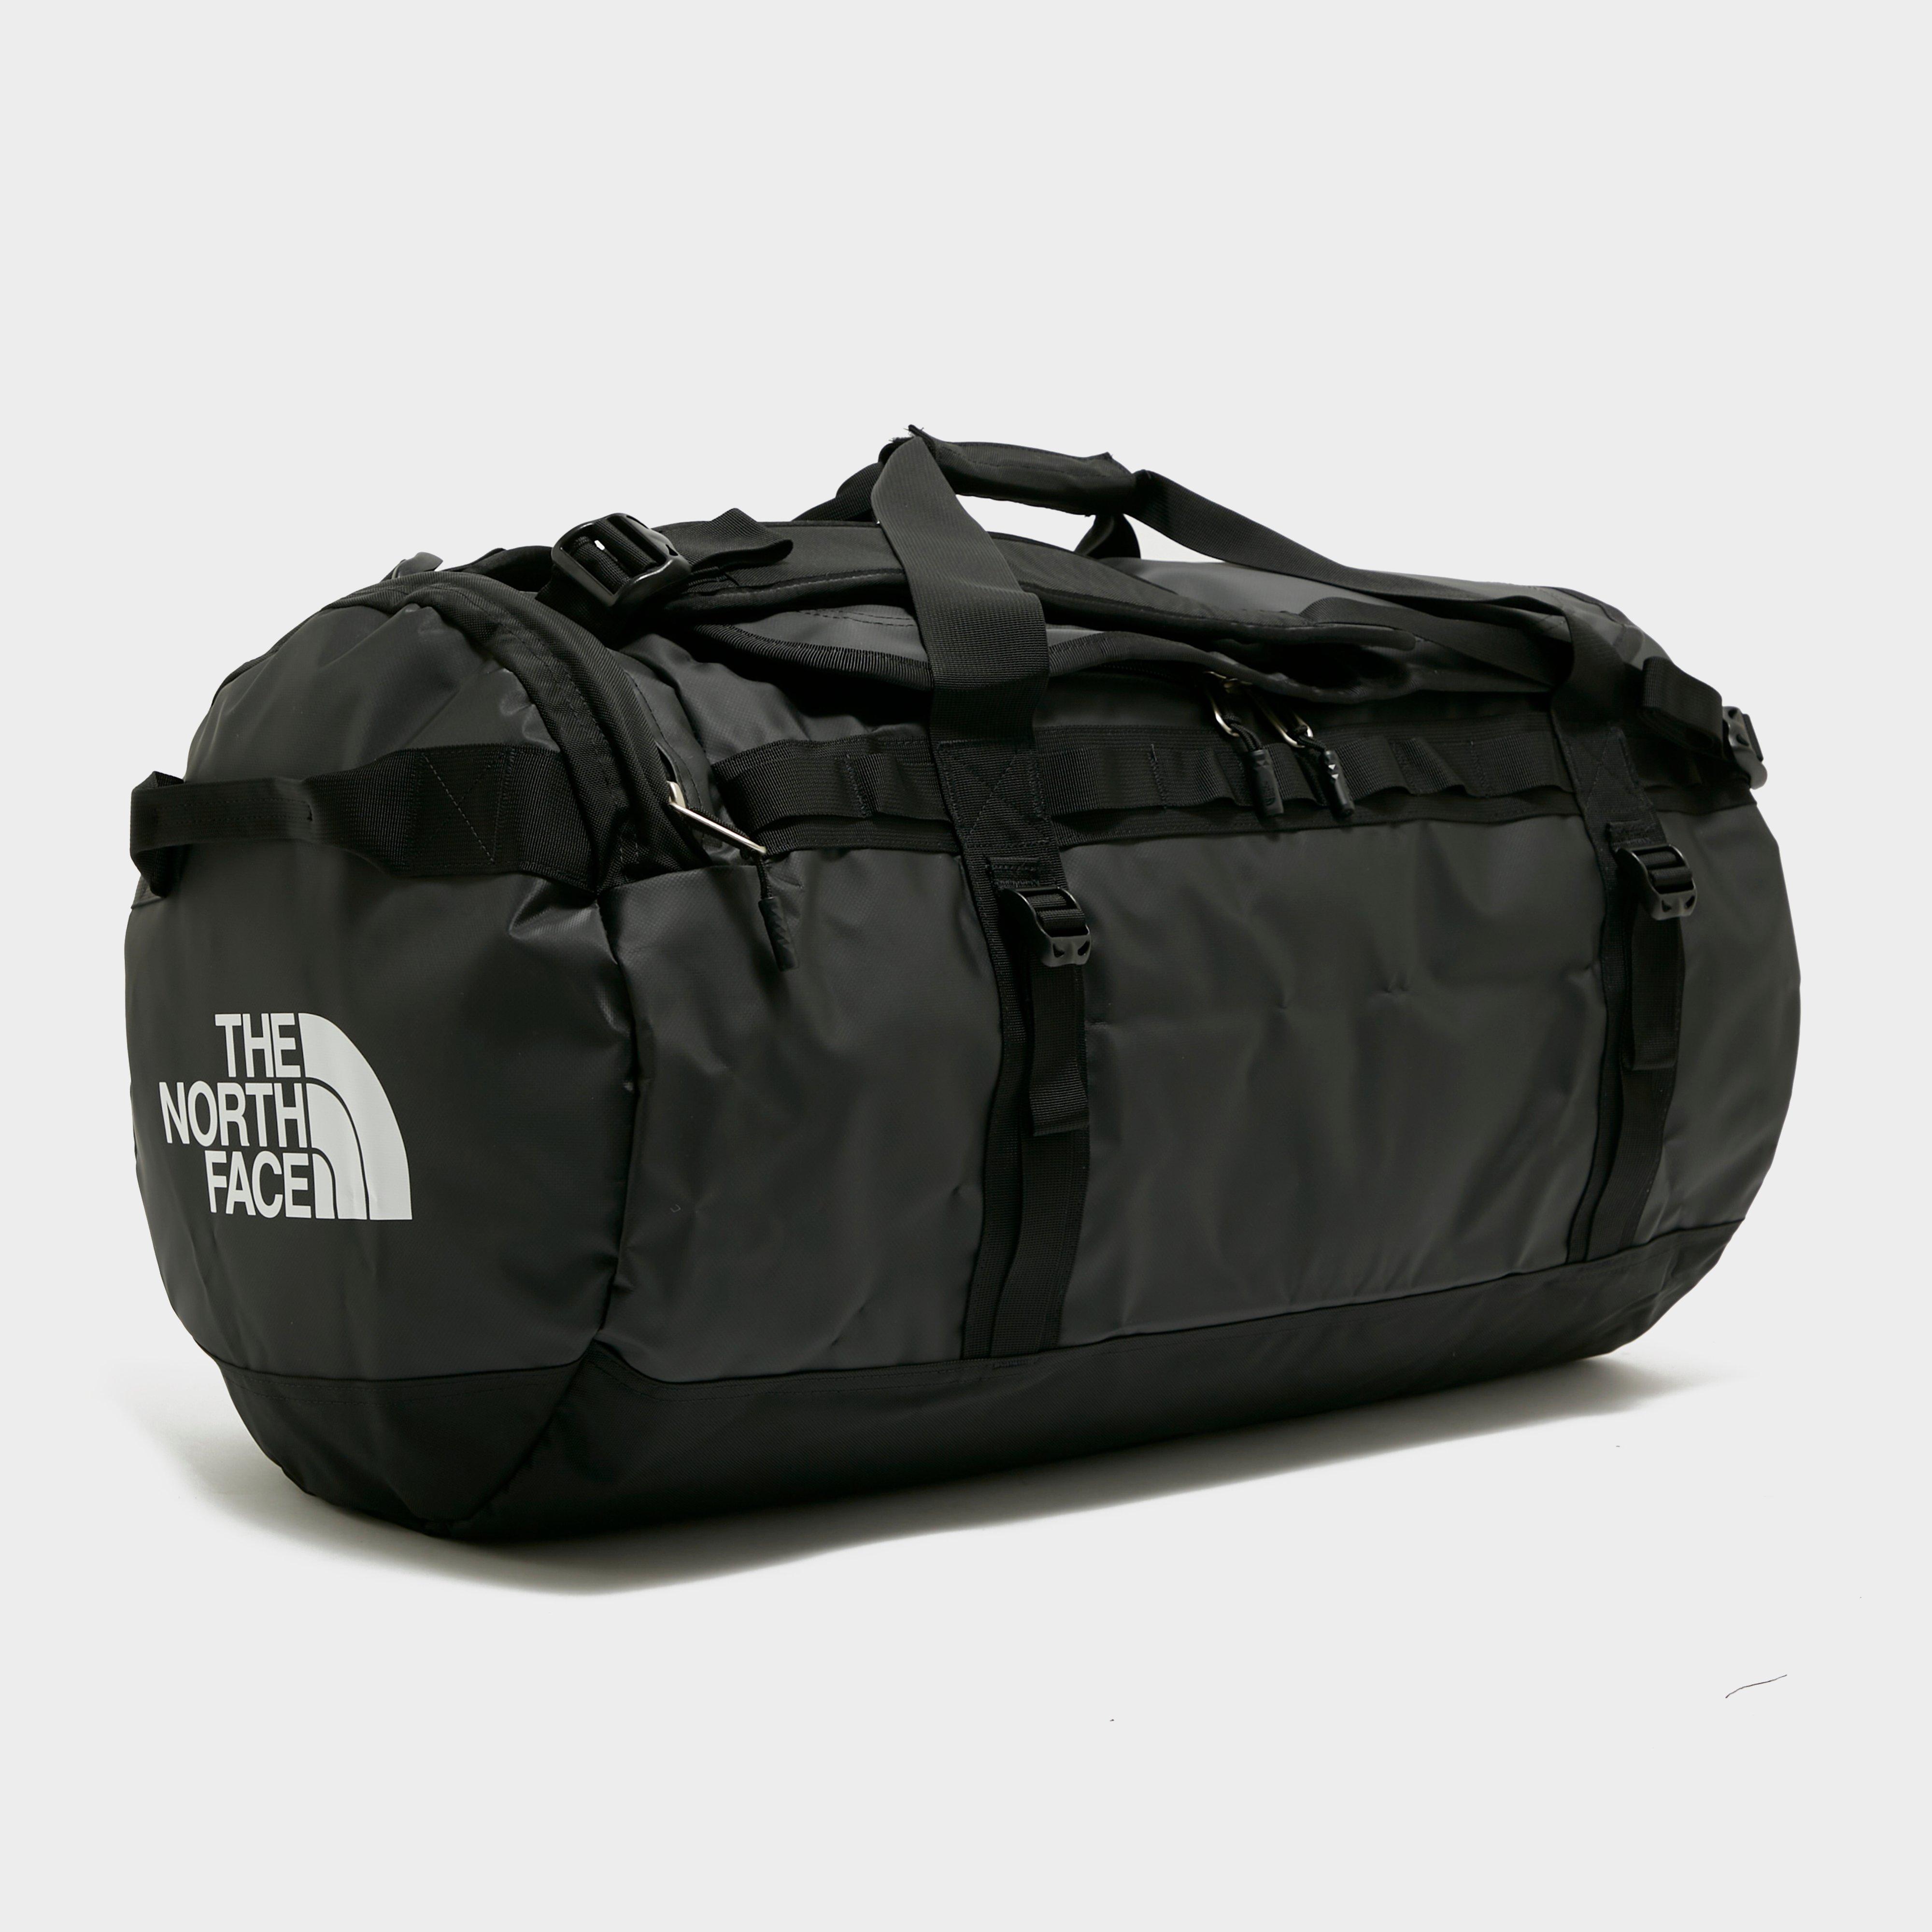  The North Face Base Camp Duffel Bag (Large)